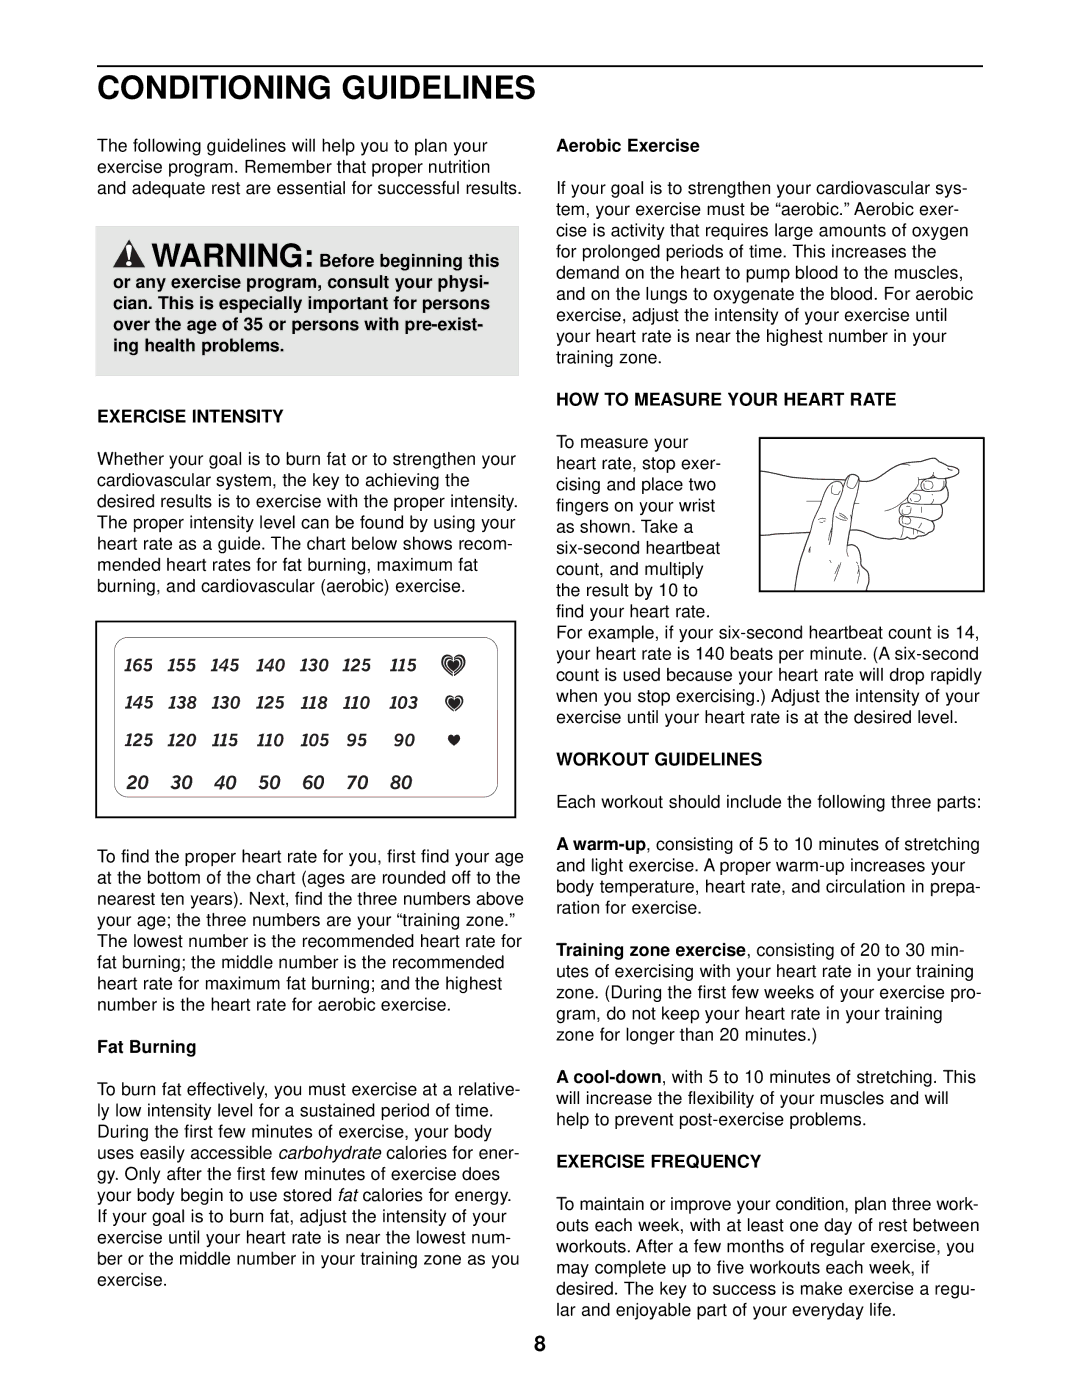 NordicTrack NTEX03990 Conditioning Guidelines, Exercise Intensity, HOW to Measure Your Heart Rate, Workout Guidelines 